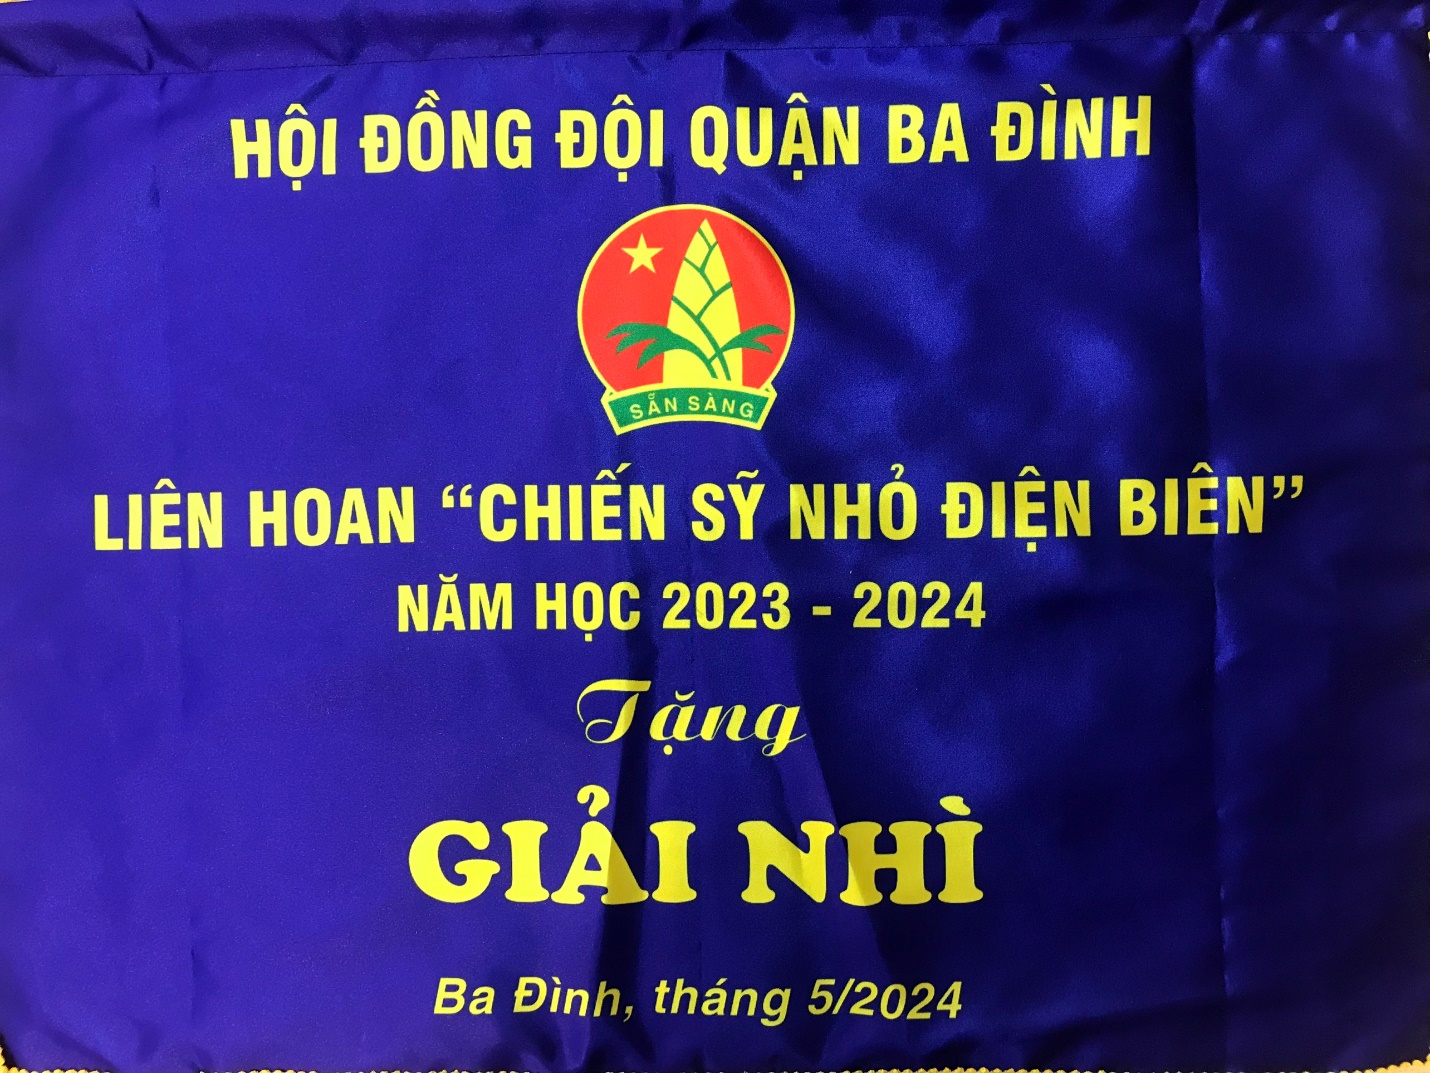 A blue fabric with yellow writing

Description automatically generated